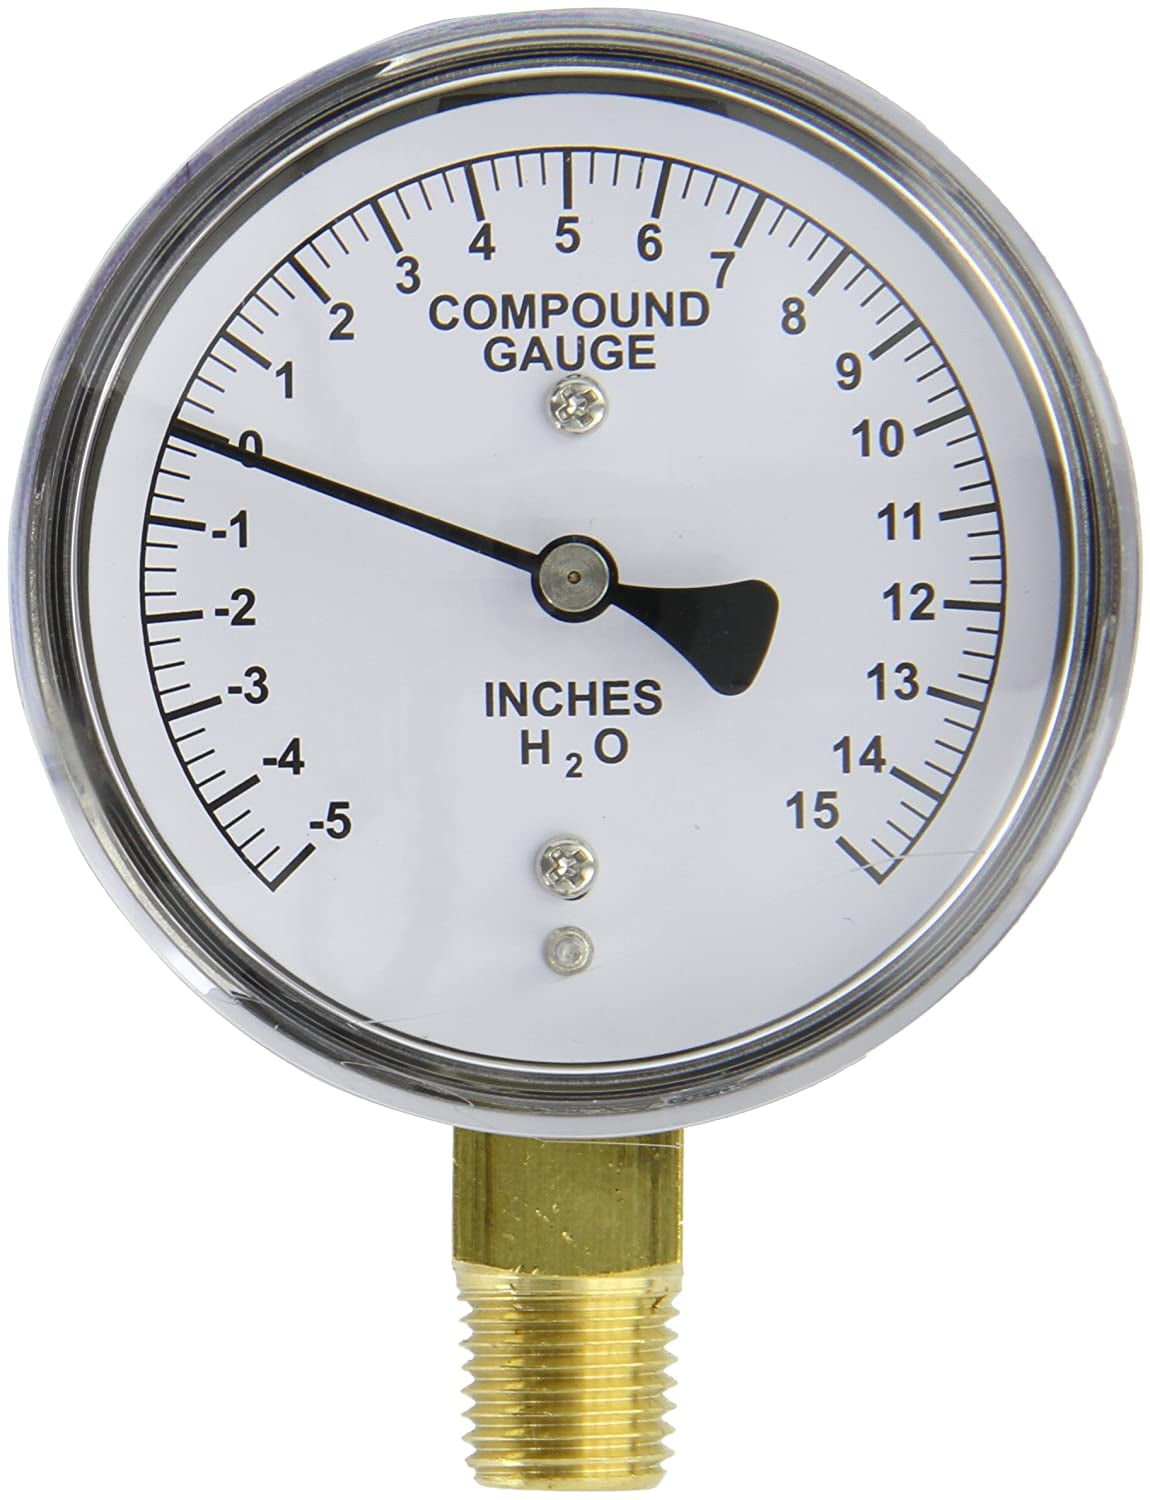 MEASURES IN INCHES OF WATER PIC Gauge LP1-254-160 0/160", 2.5" Dial 